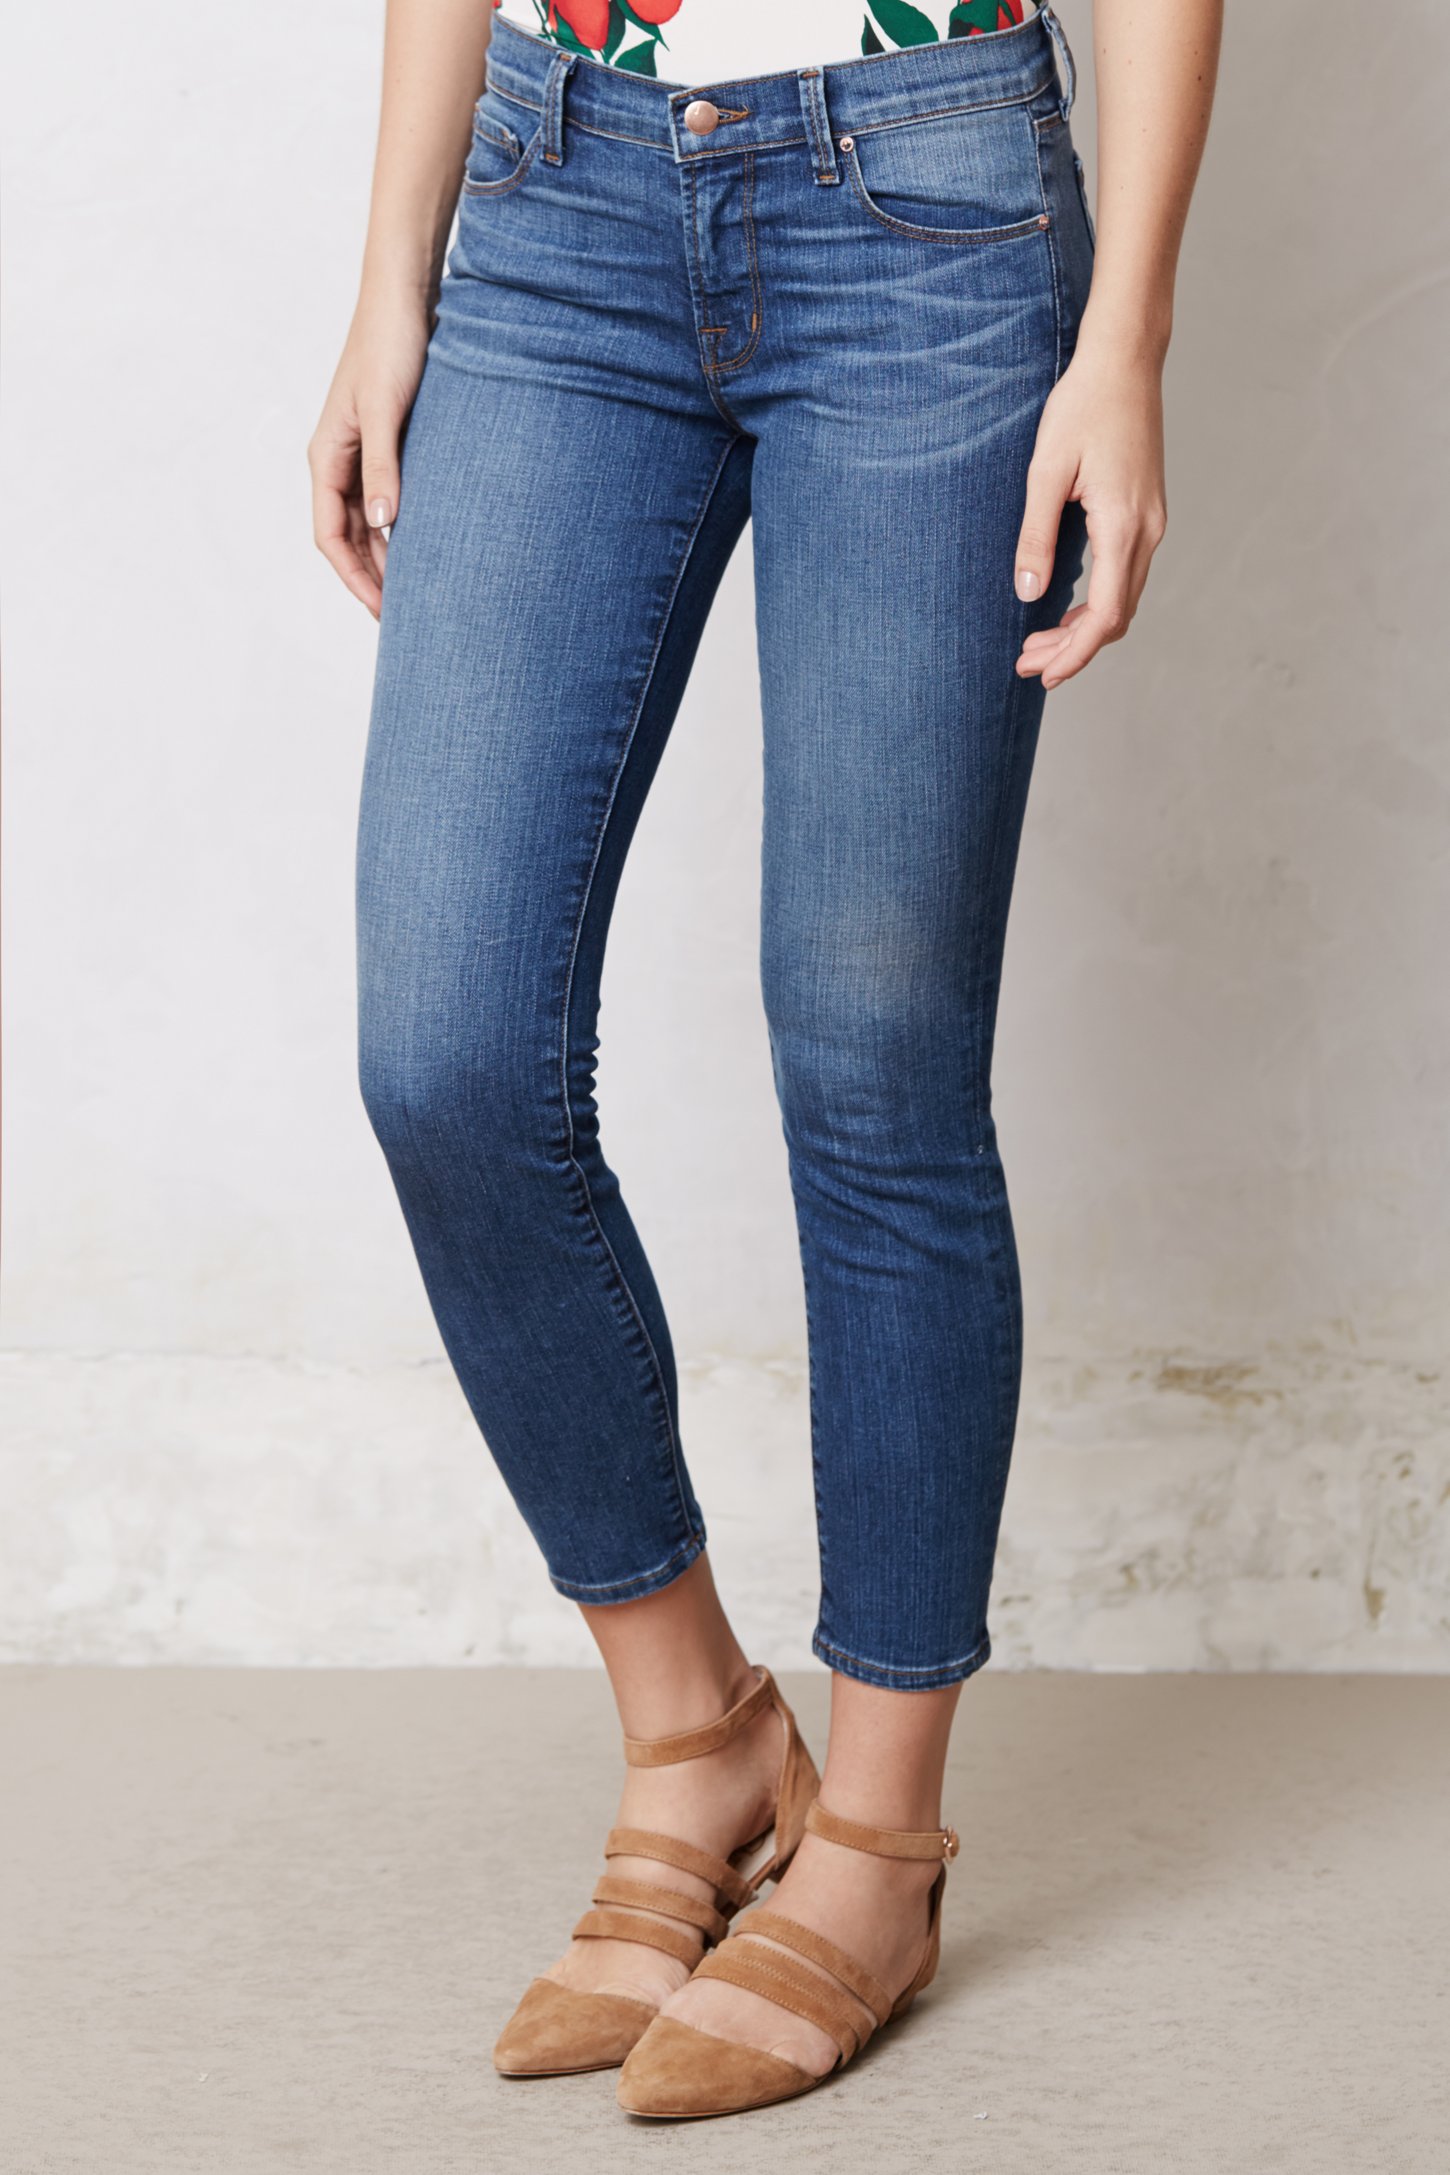 Lyst - J brand Alana High-rise Cropped Jeans in Blue